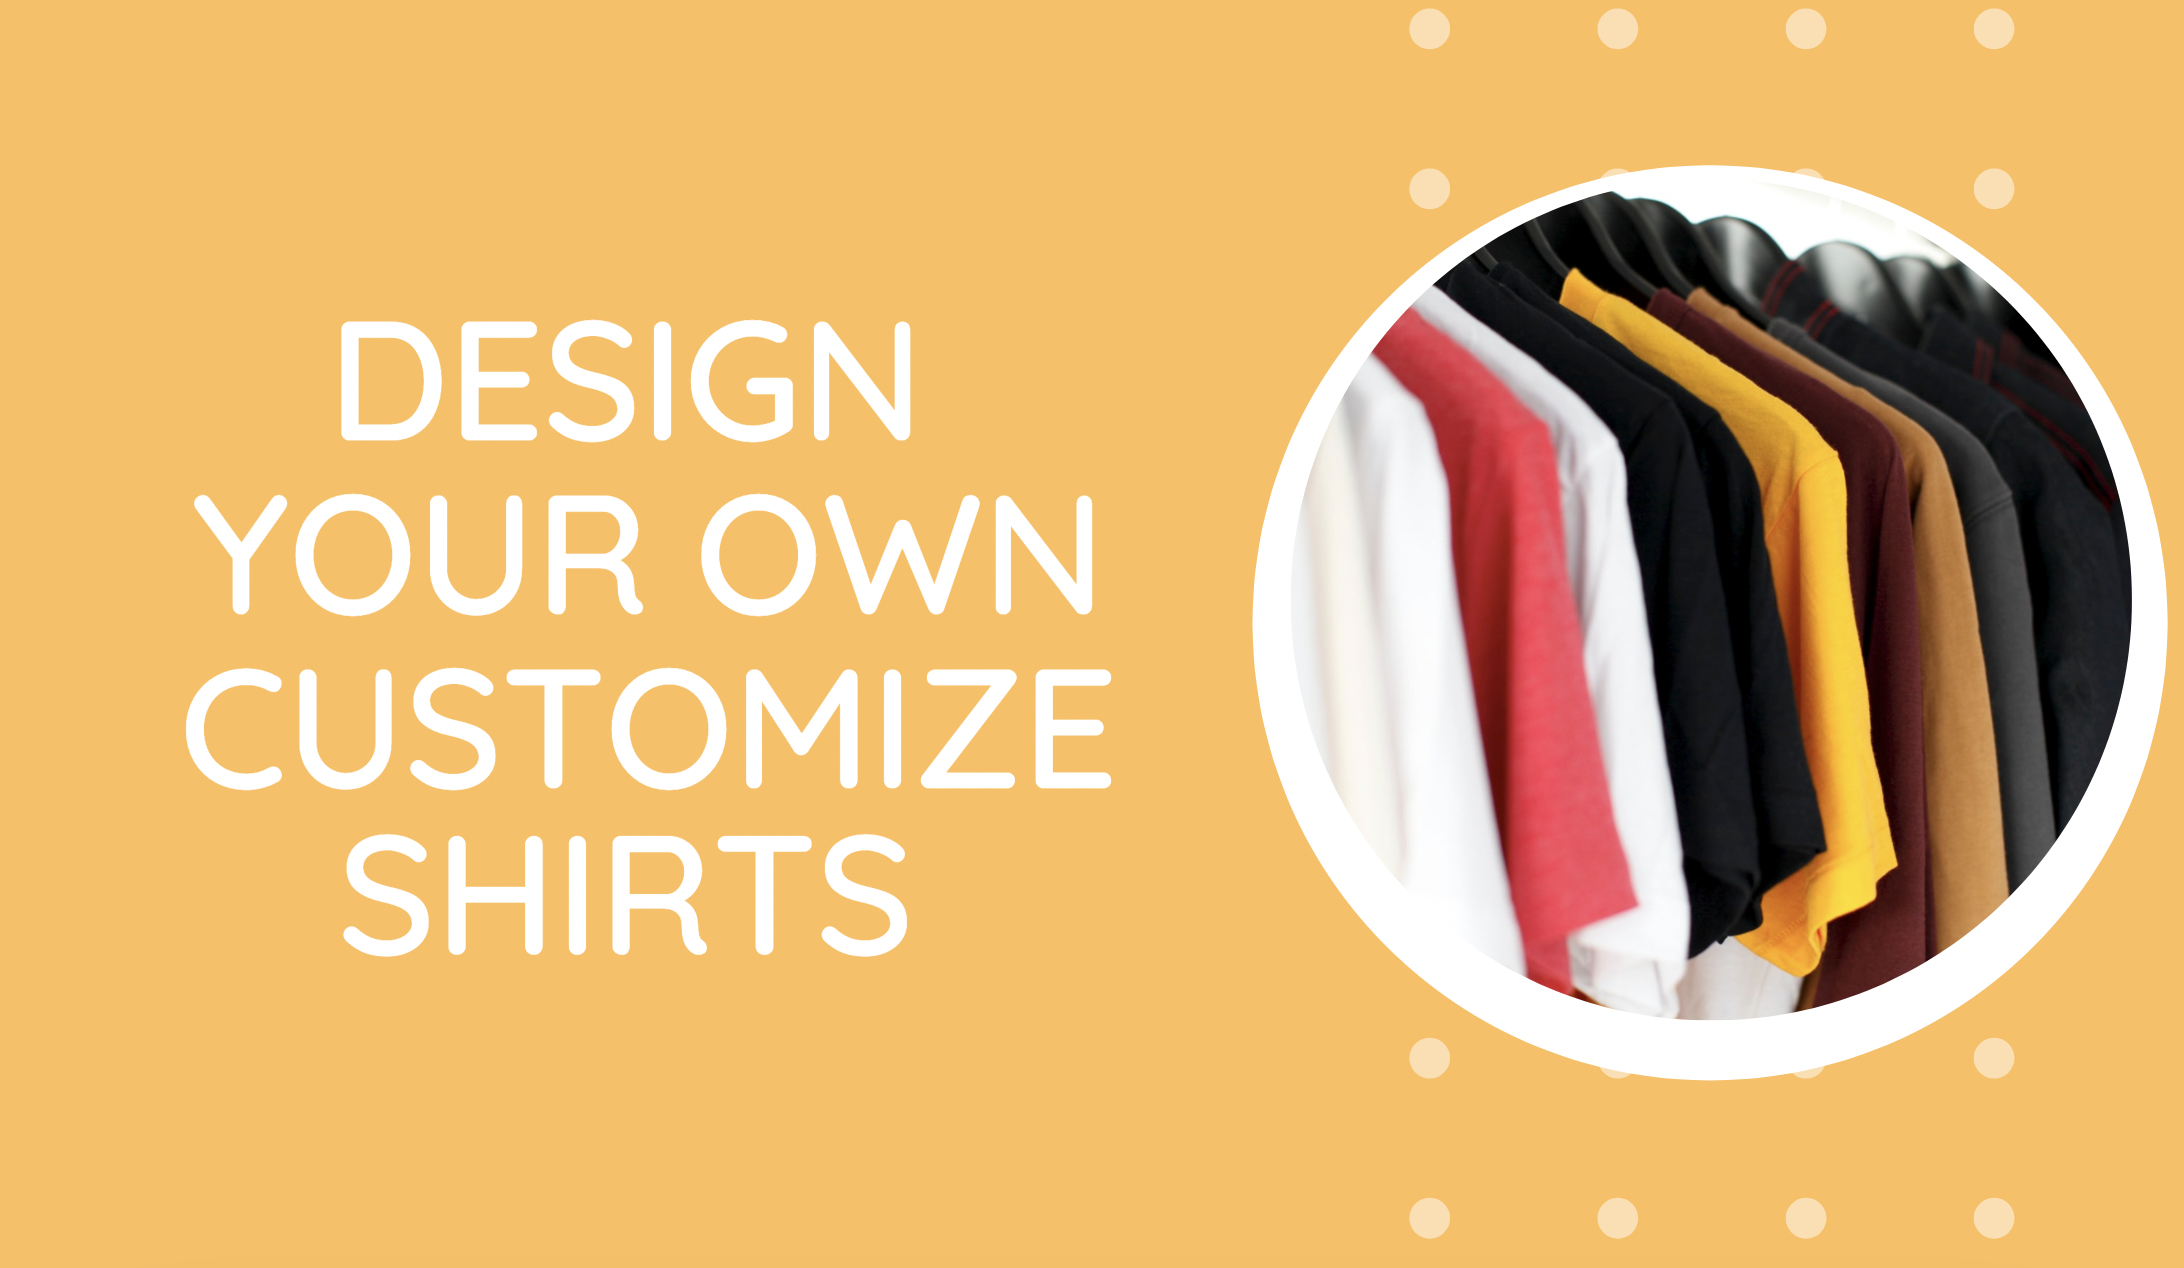 Design Your Own Customize Shirts